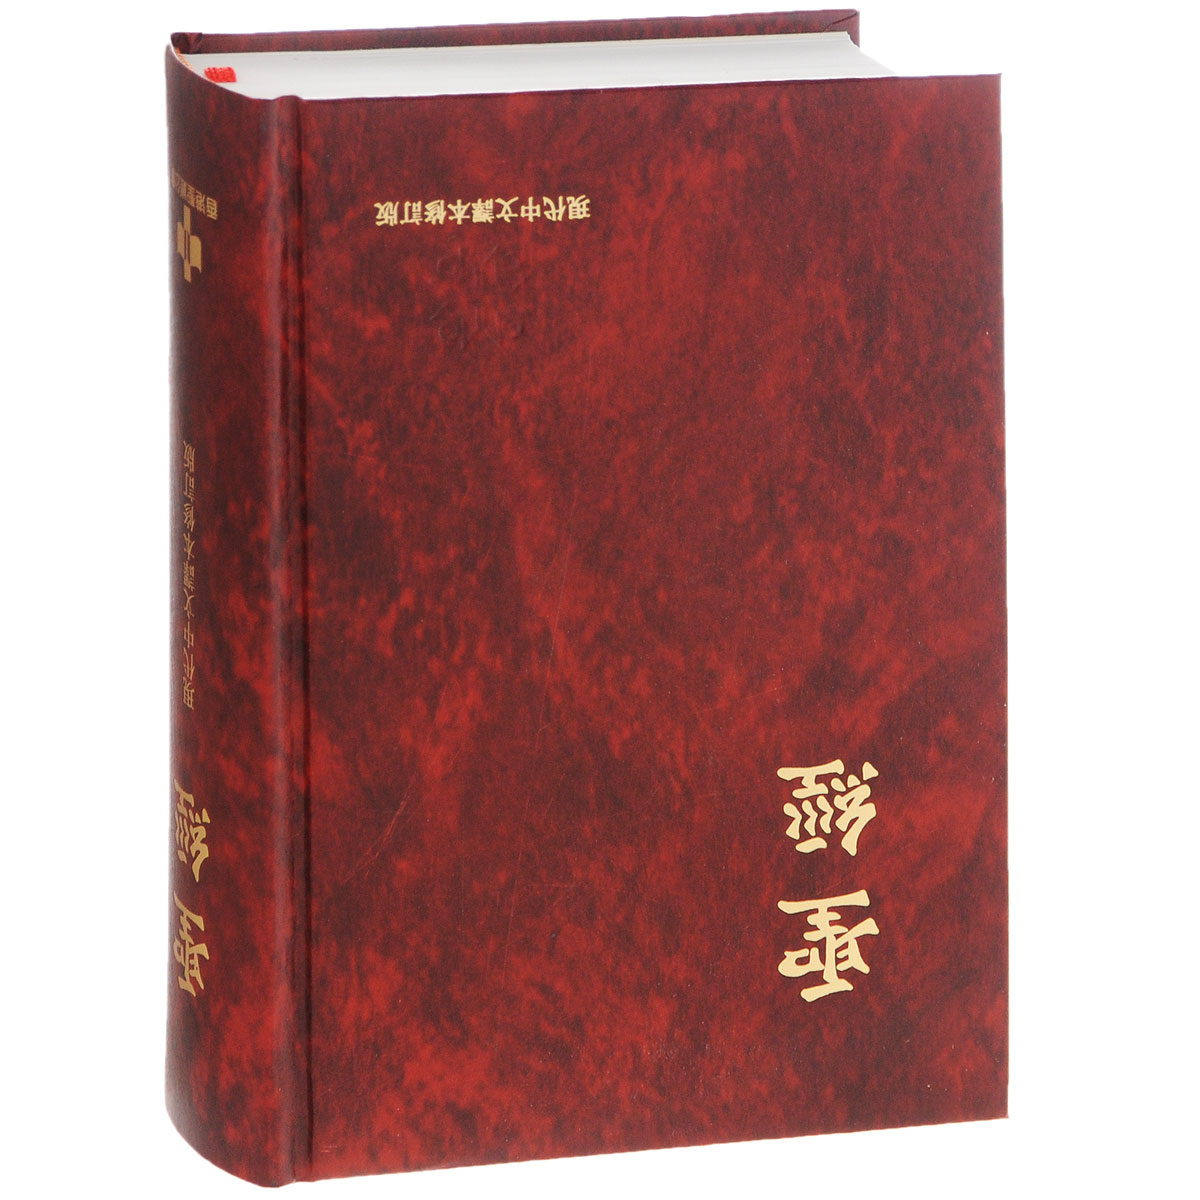 The Holy Bible: Today's Chinese Version